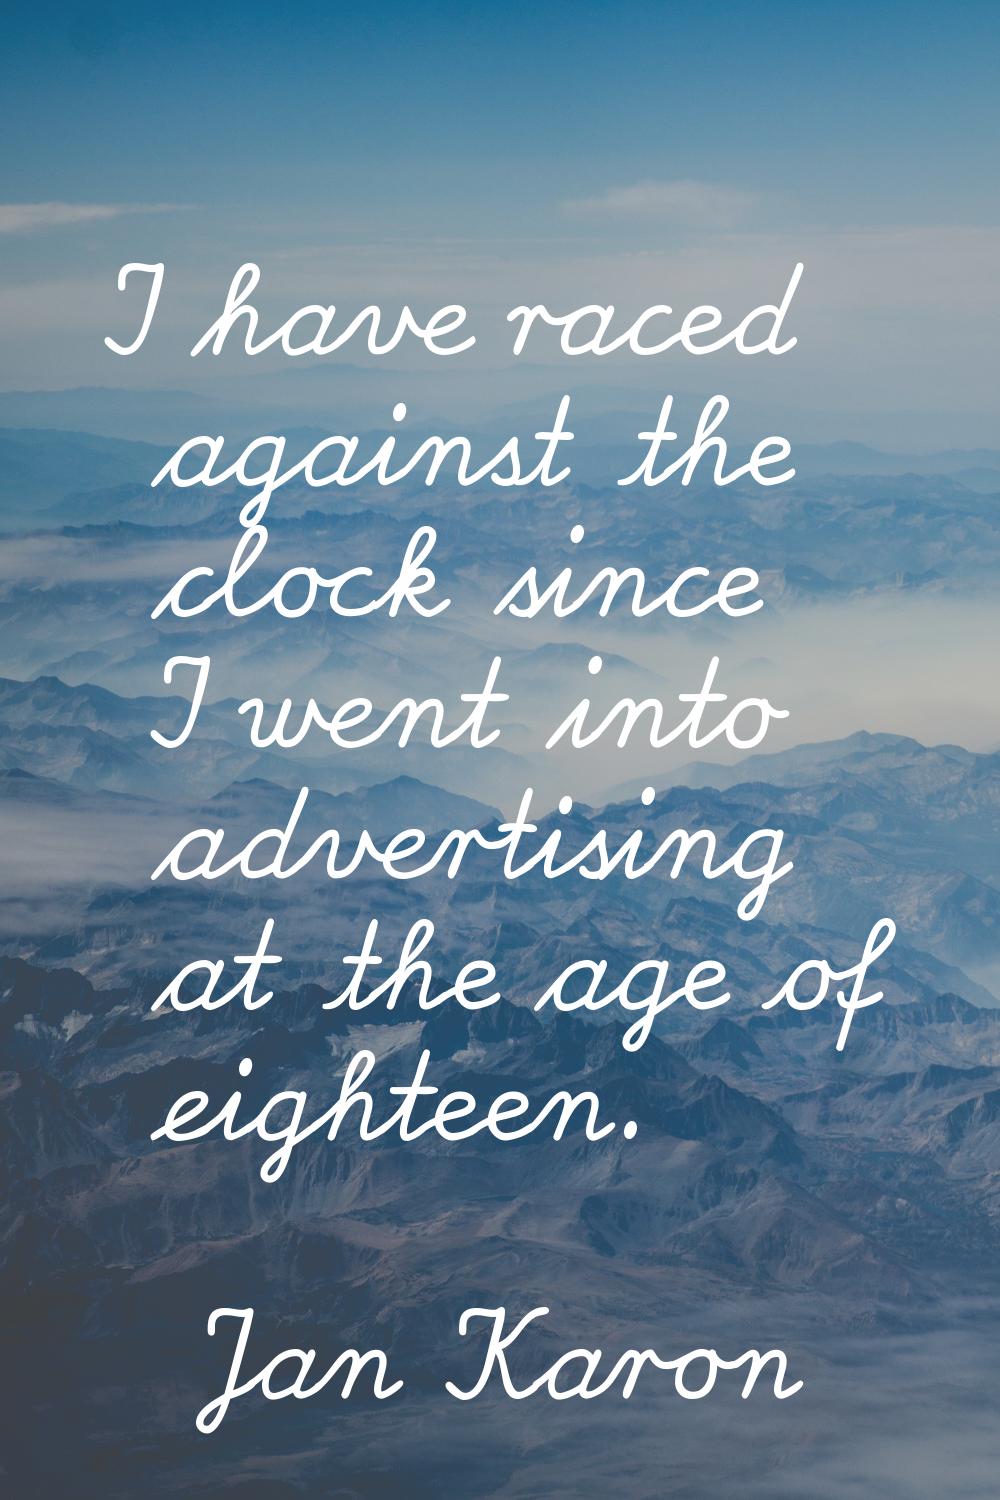 I have raced against the clock since I went into advertising at the age of eighteen.